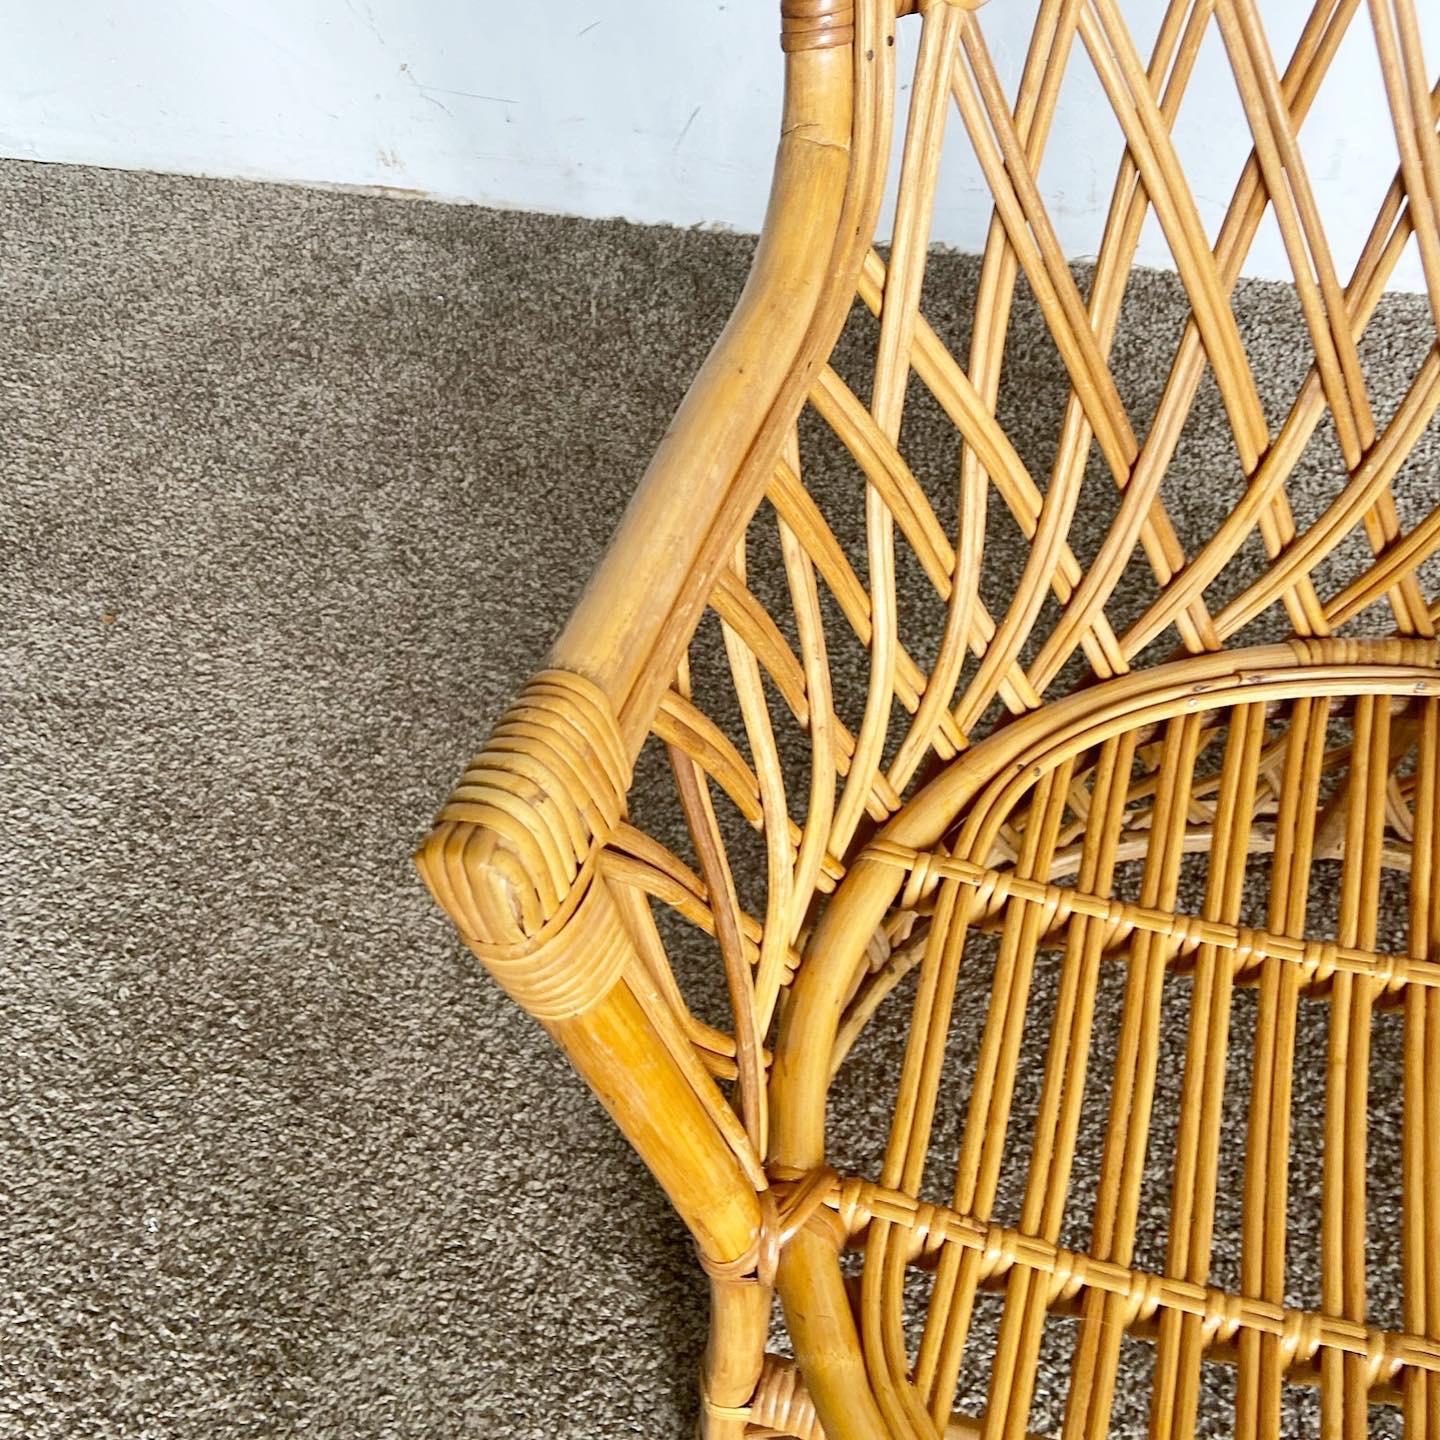 Late 20th Century Boho Chic Bamboo Rattan Side Chair With Circular Brown Seat Cushion For Sale